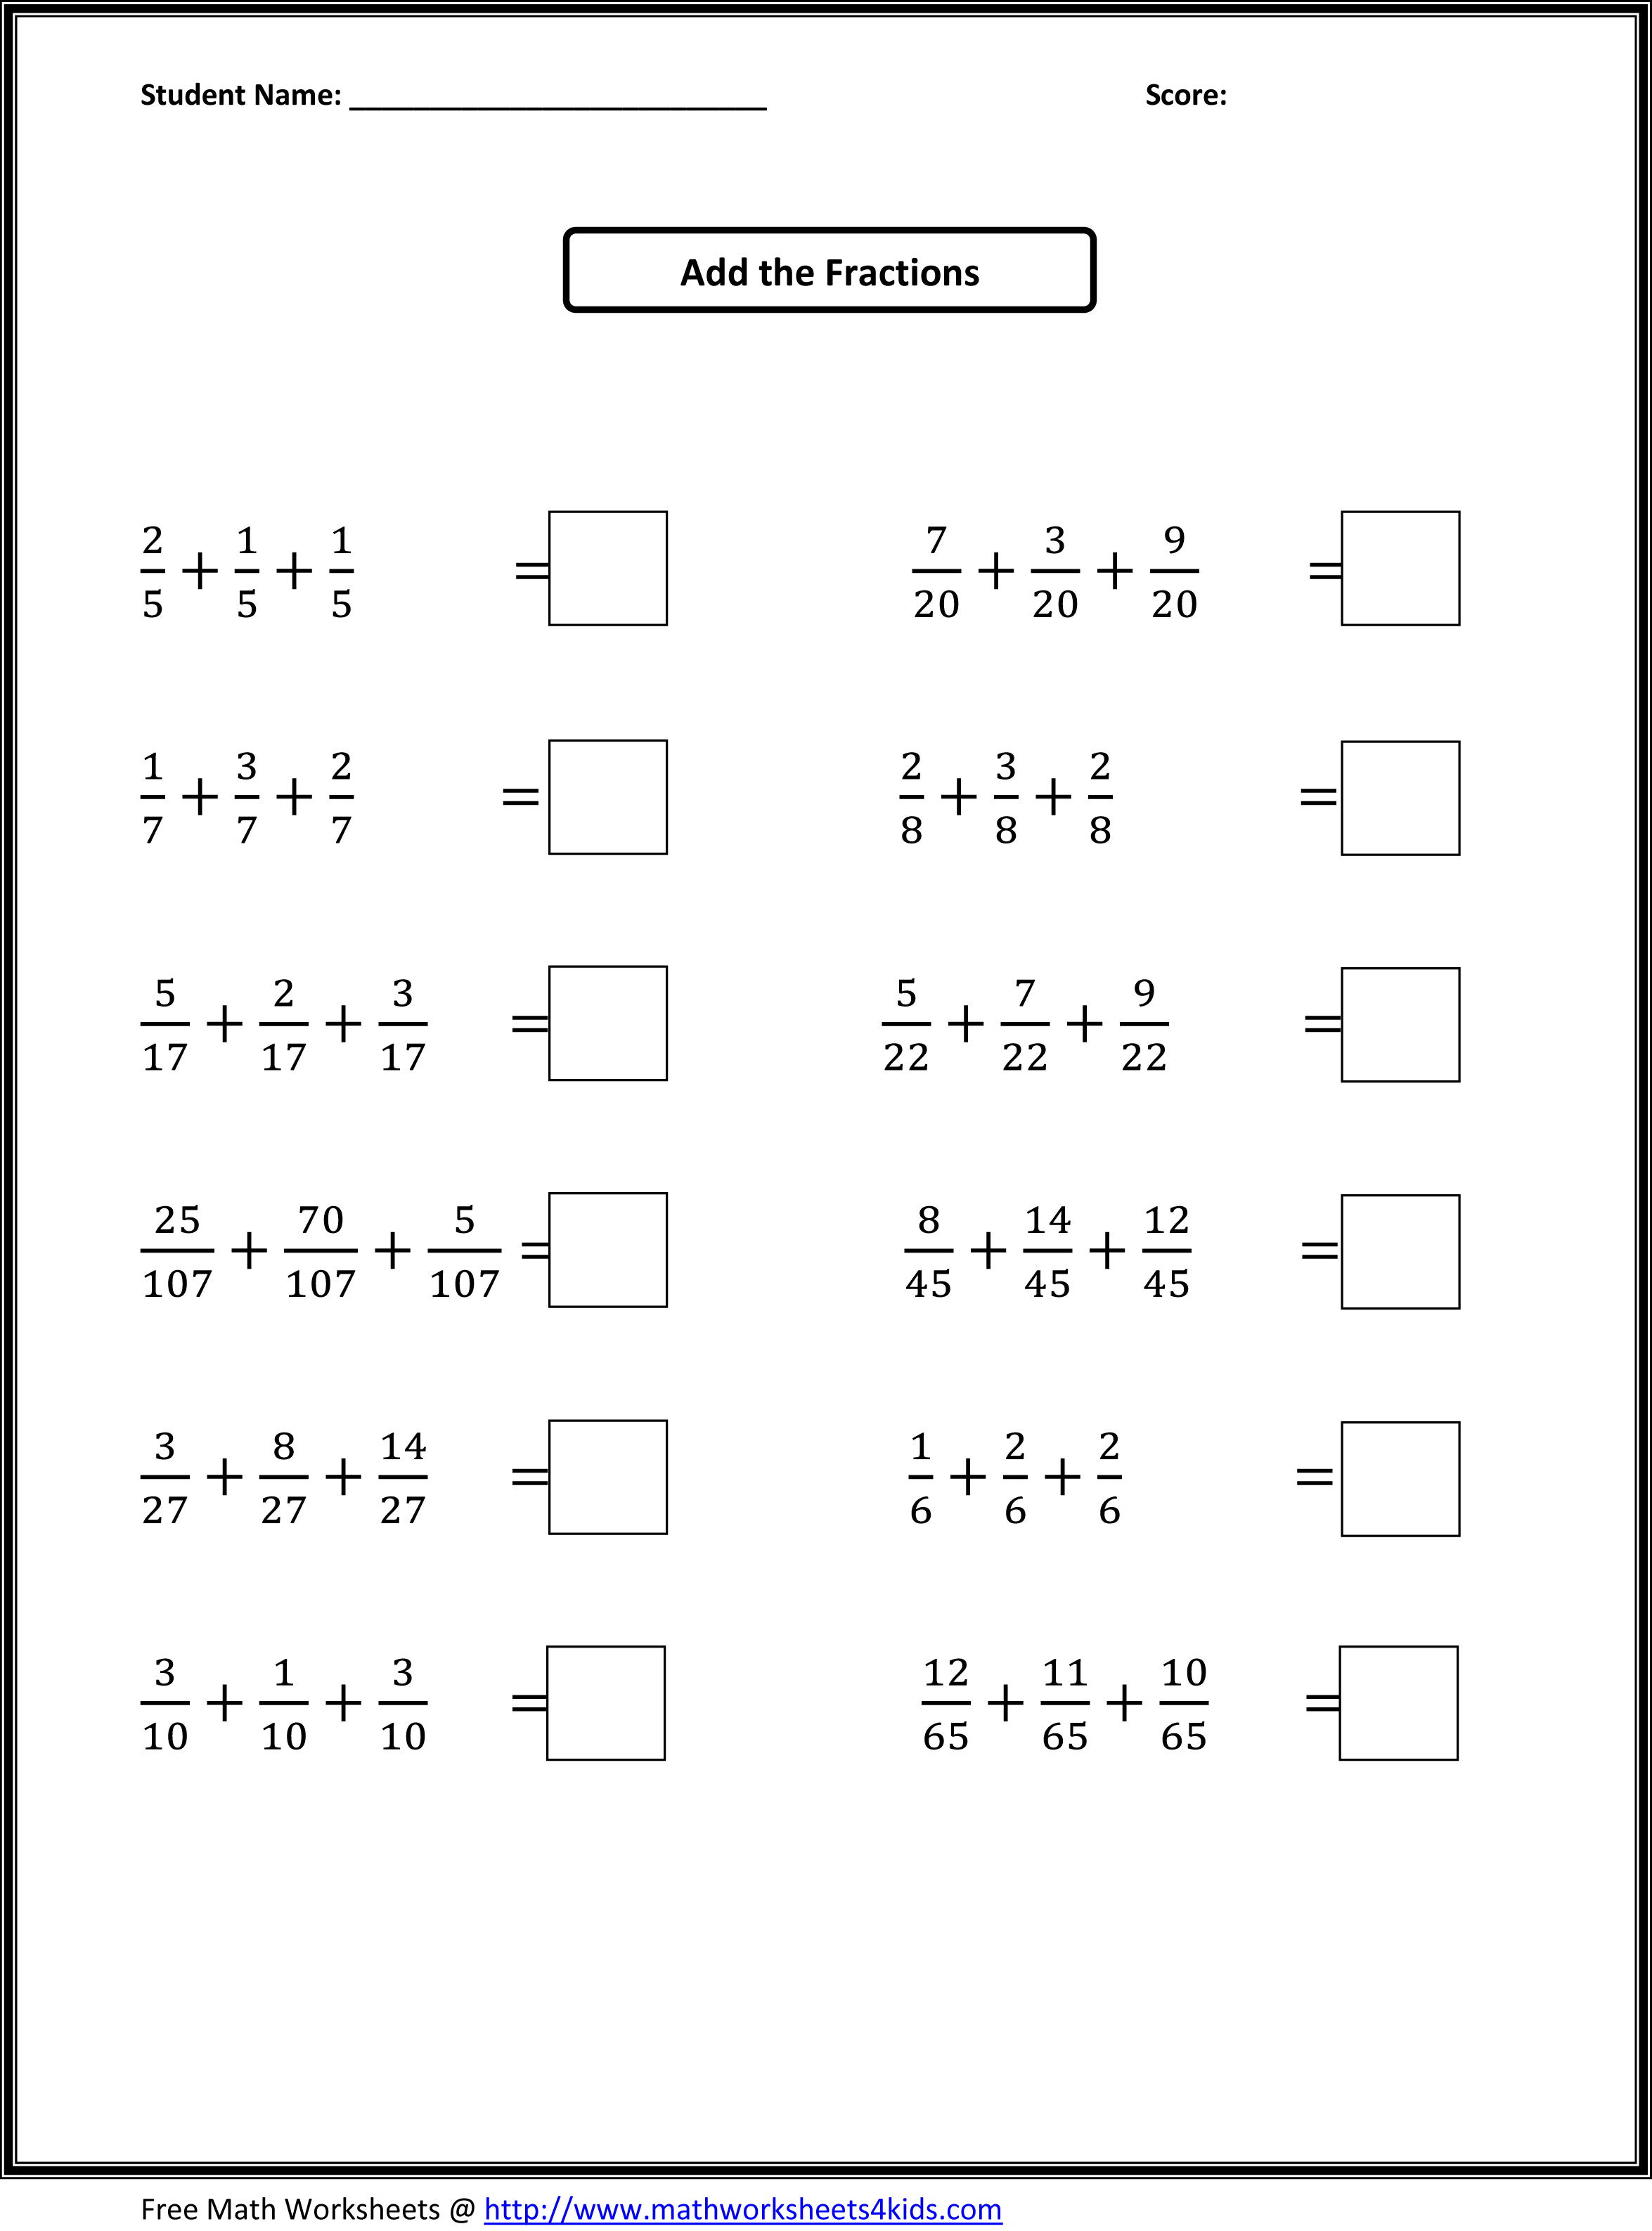 Fractions Worksheets Grade 4 Adding Mixed Numbers